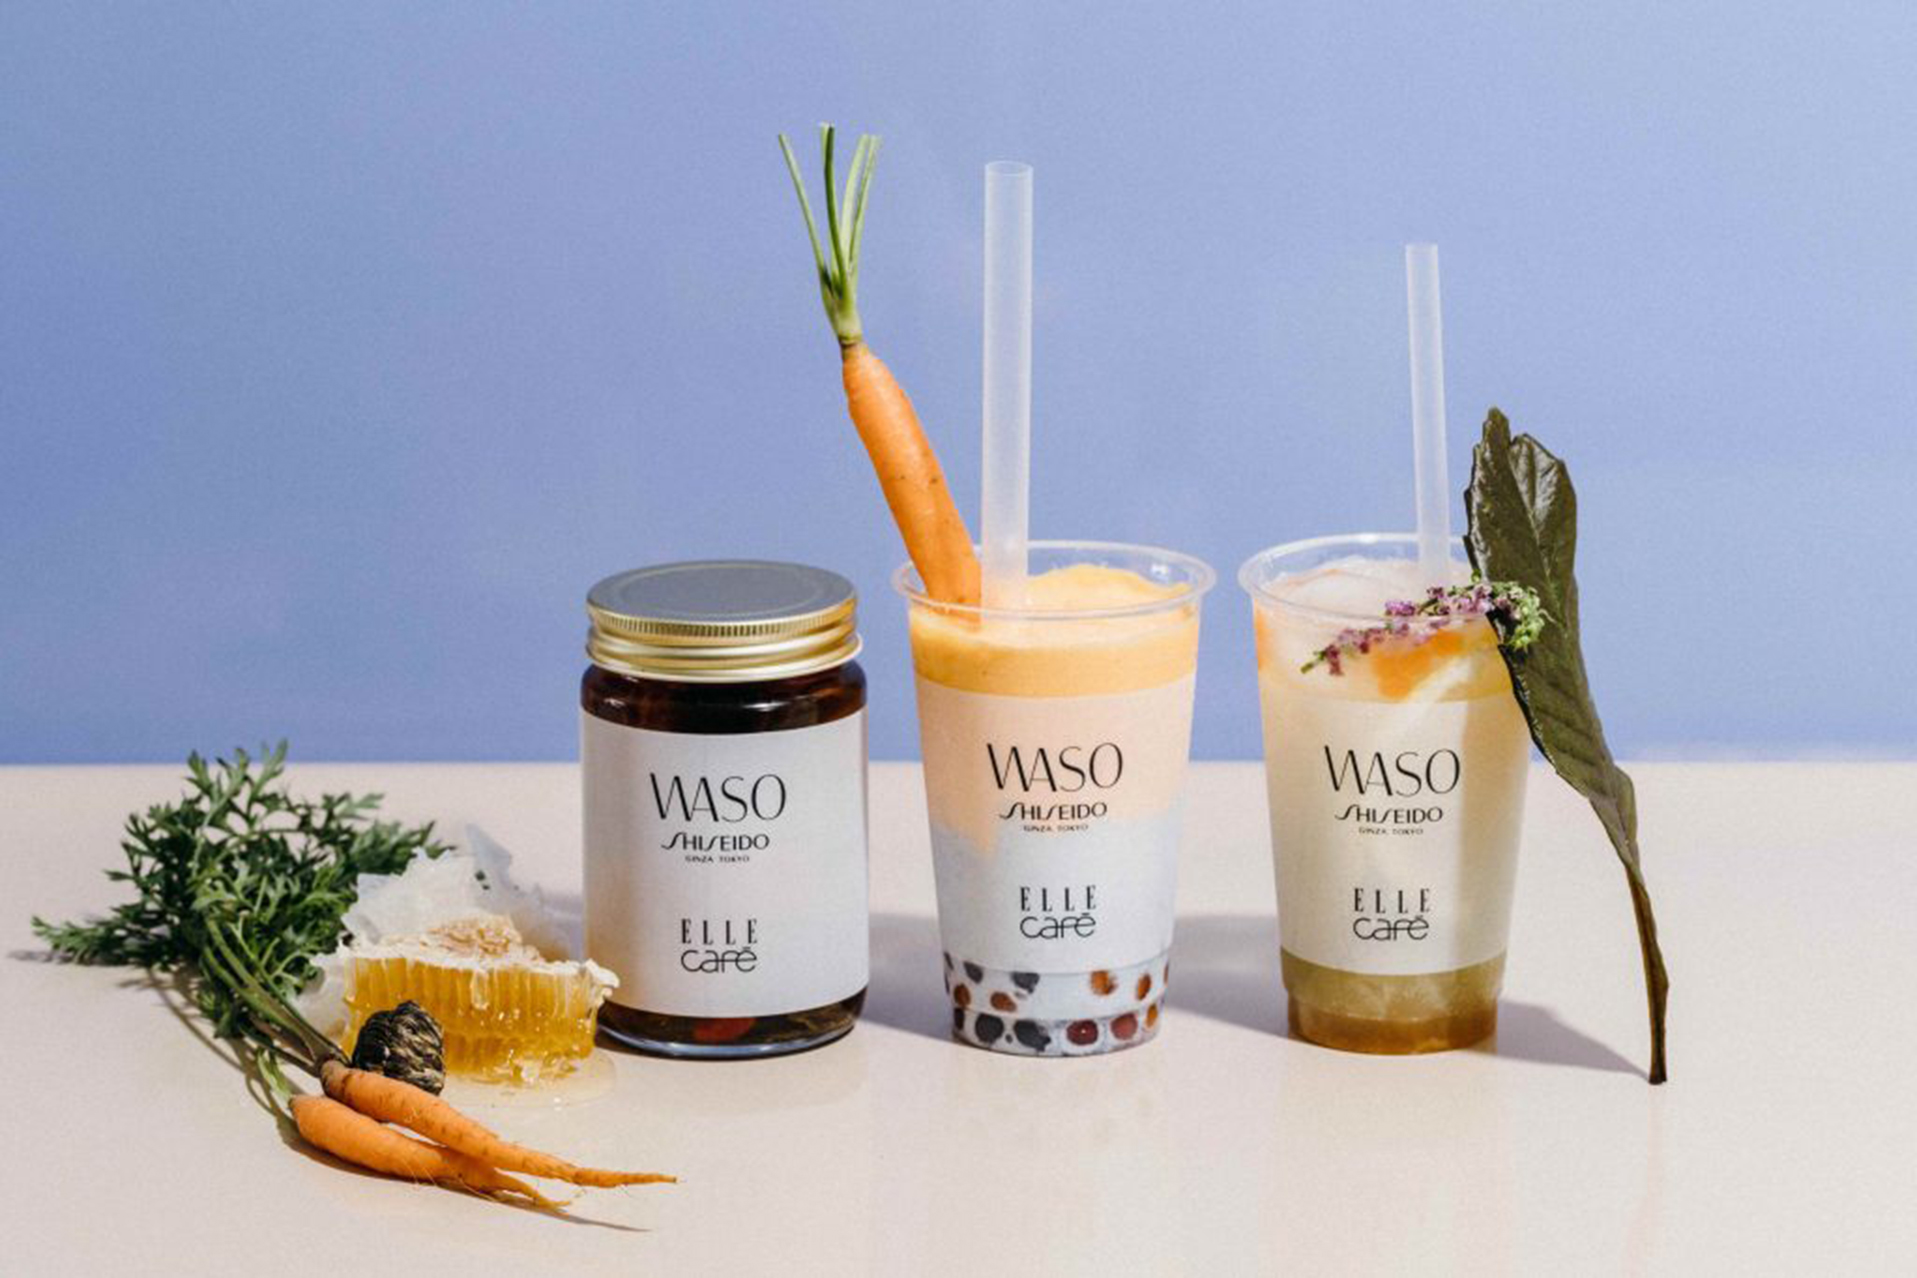 ELLE café NEWS　SHISEIDO new skincare line collaborated with “WASO”_EN